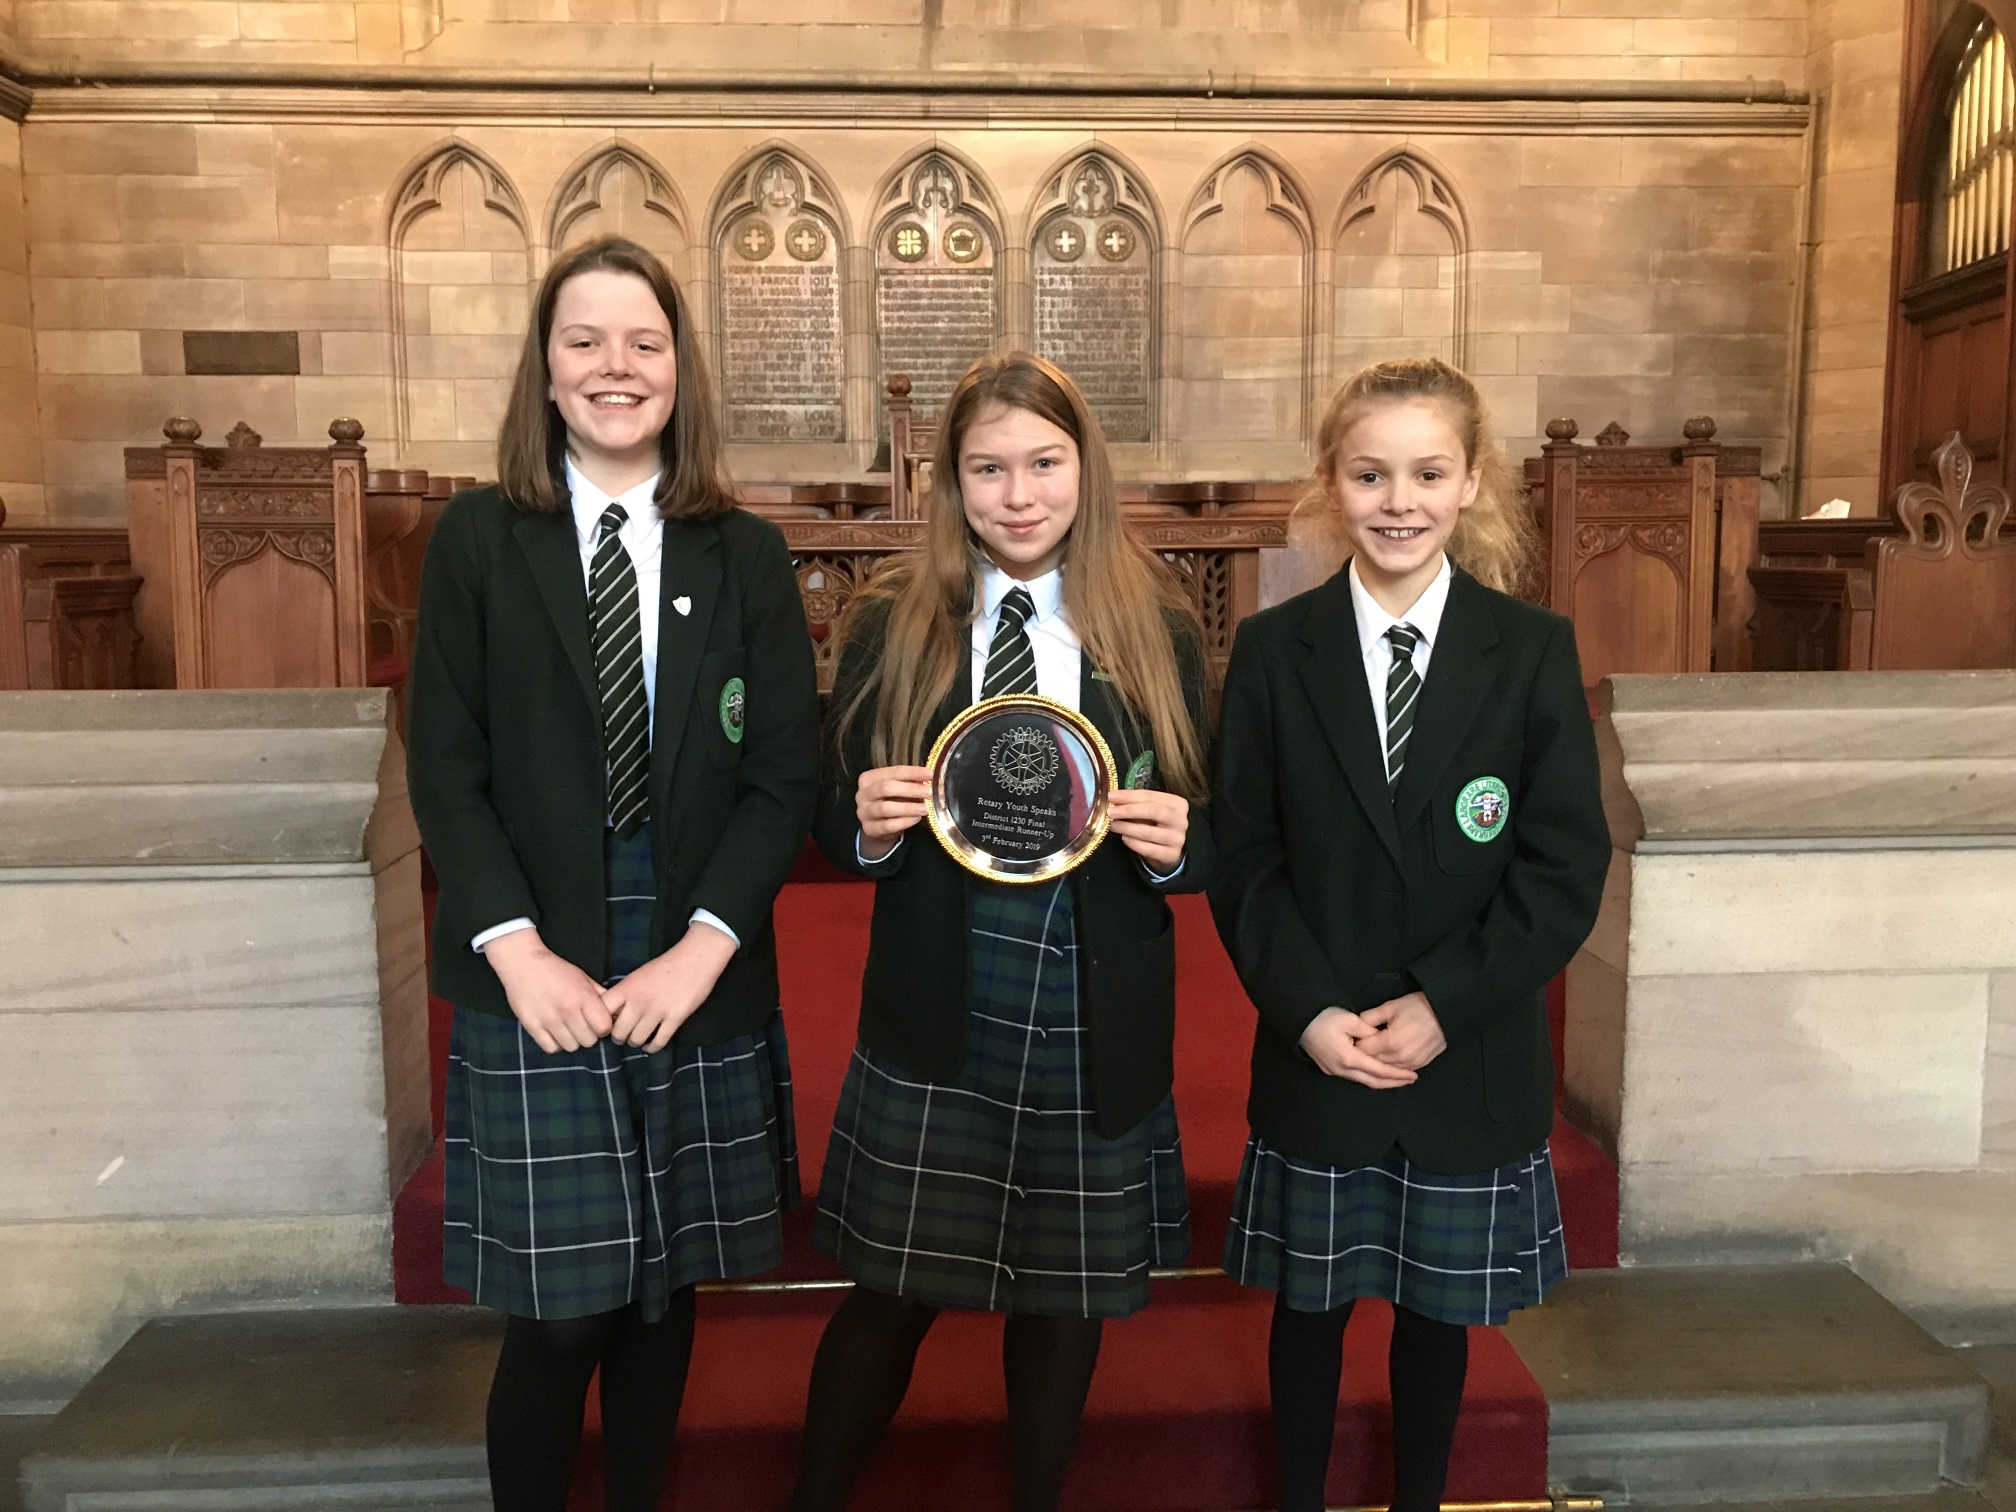 St Columba's pupil are runners up at the Intermediate District Final of the Rotary Club Youth Speaks competition